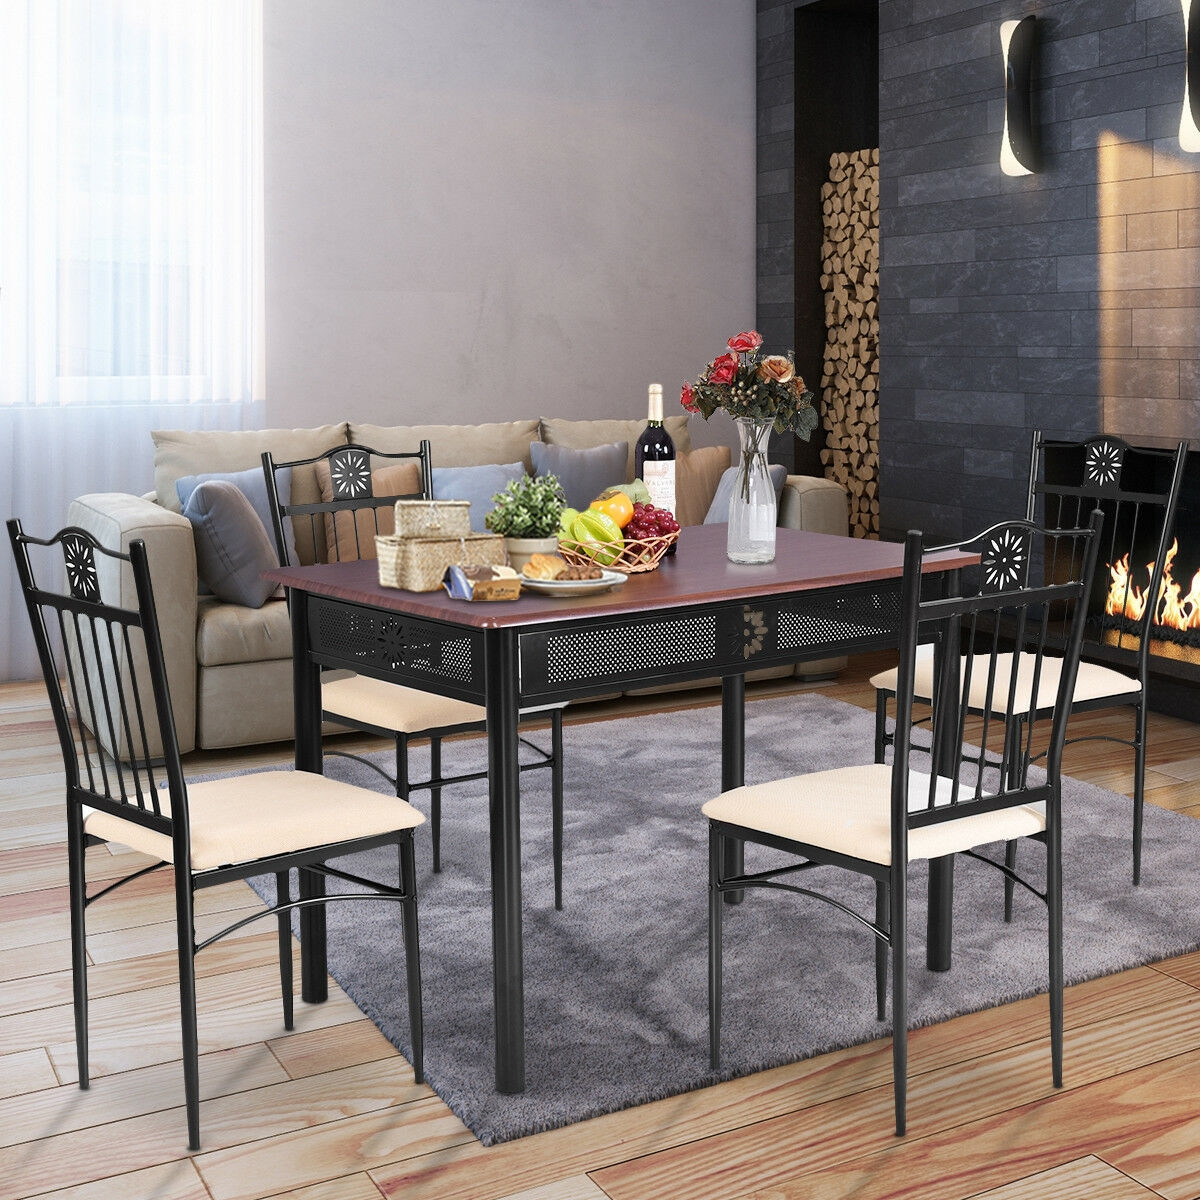 5 Pcs Dining Set Wood Metal Table And 4 Chairs With Cushions